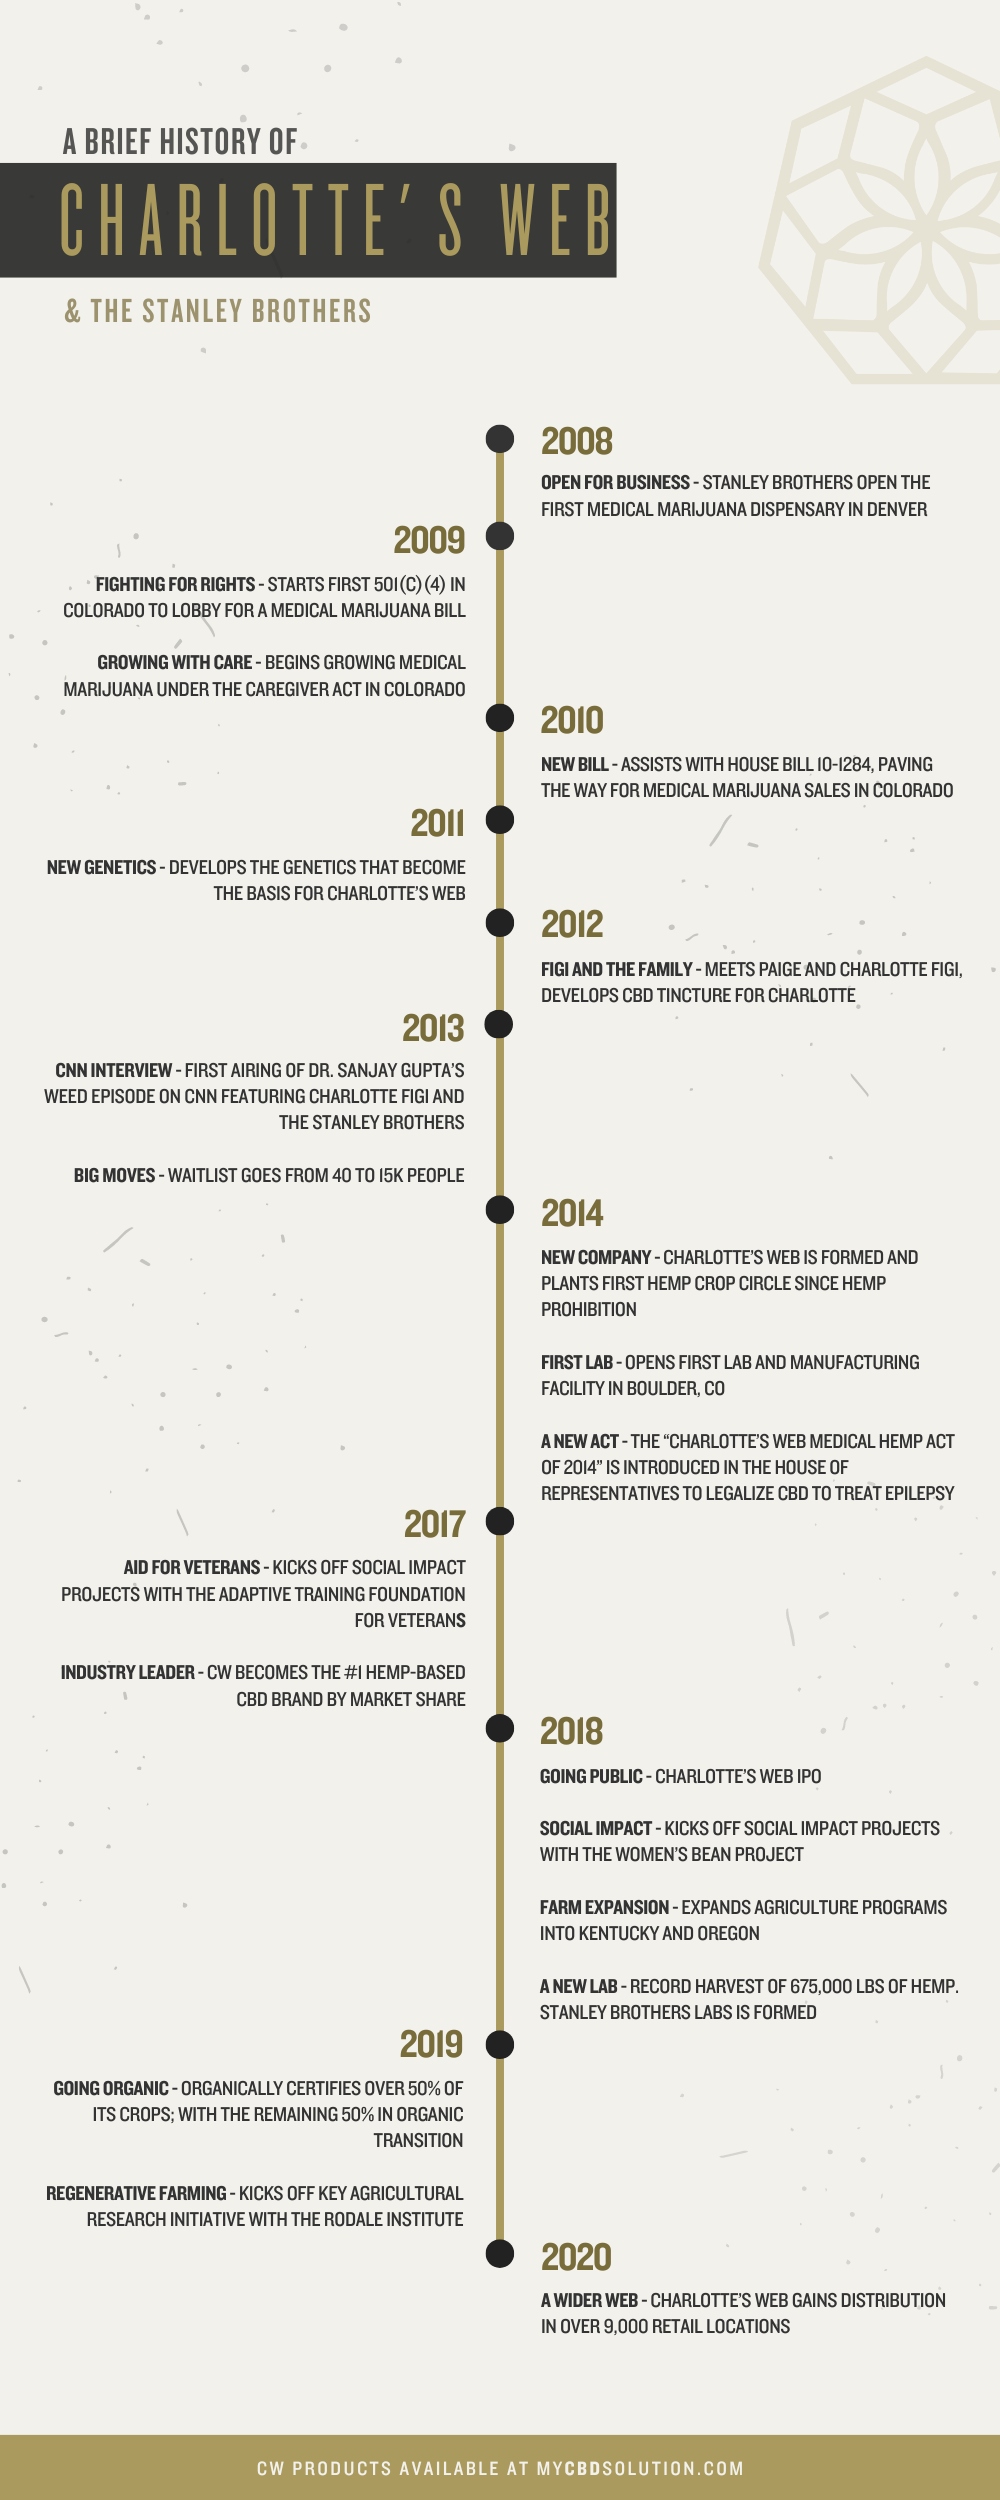 Infographic Showing a Brief History of Charlotte's Web CBD and The Stanley Brothers